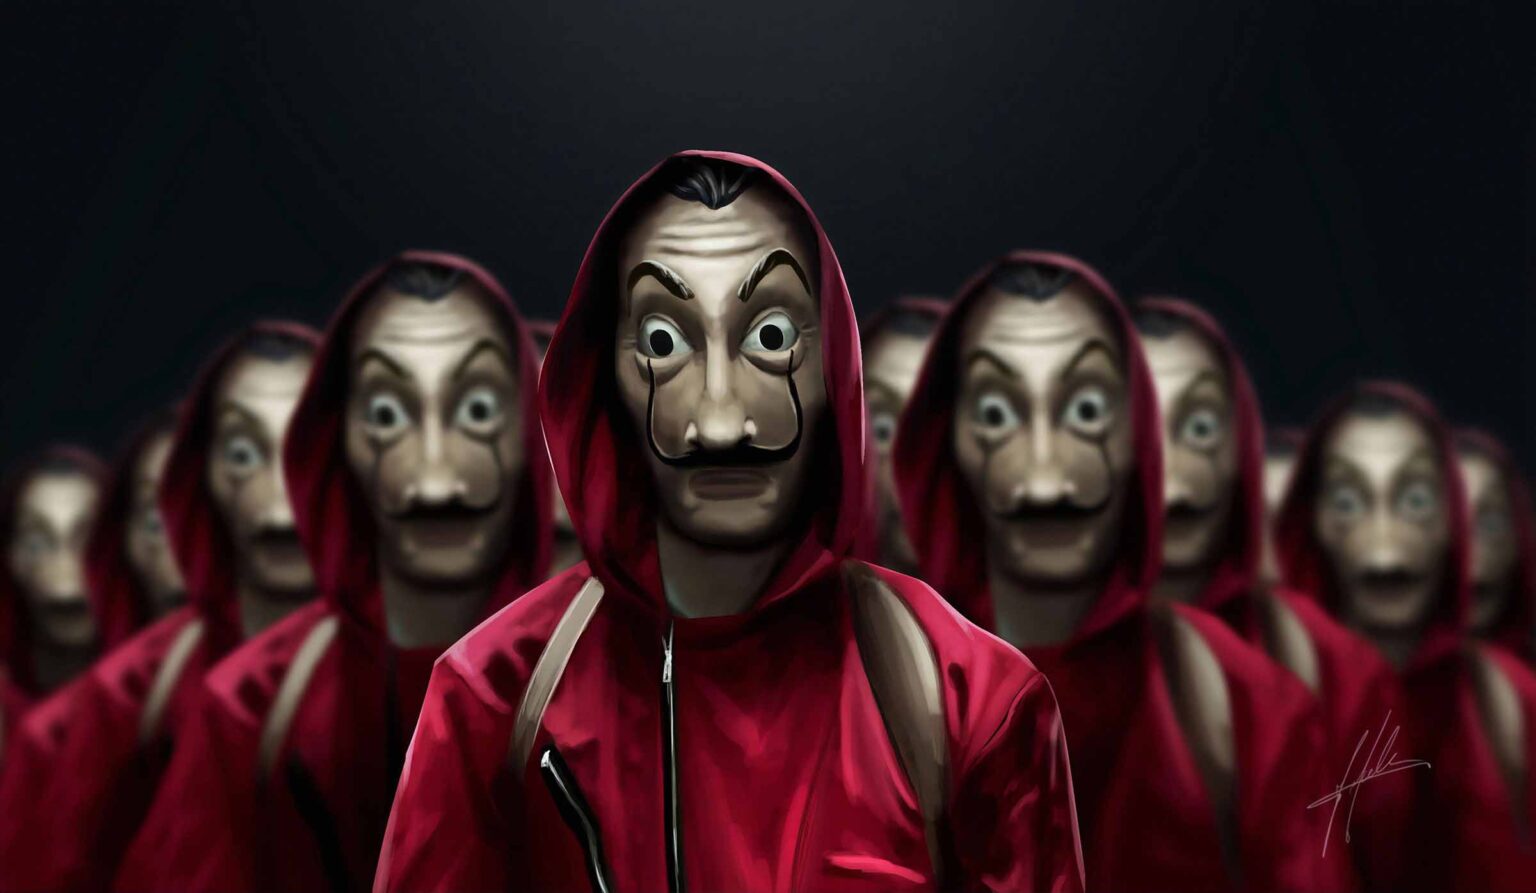 As production continues on Netflix's 'Money Heist', fans are worried for the ending of the show. Here's what creator Alex Pena says about the show.